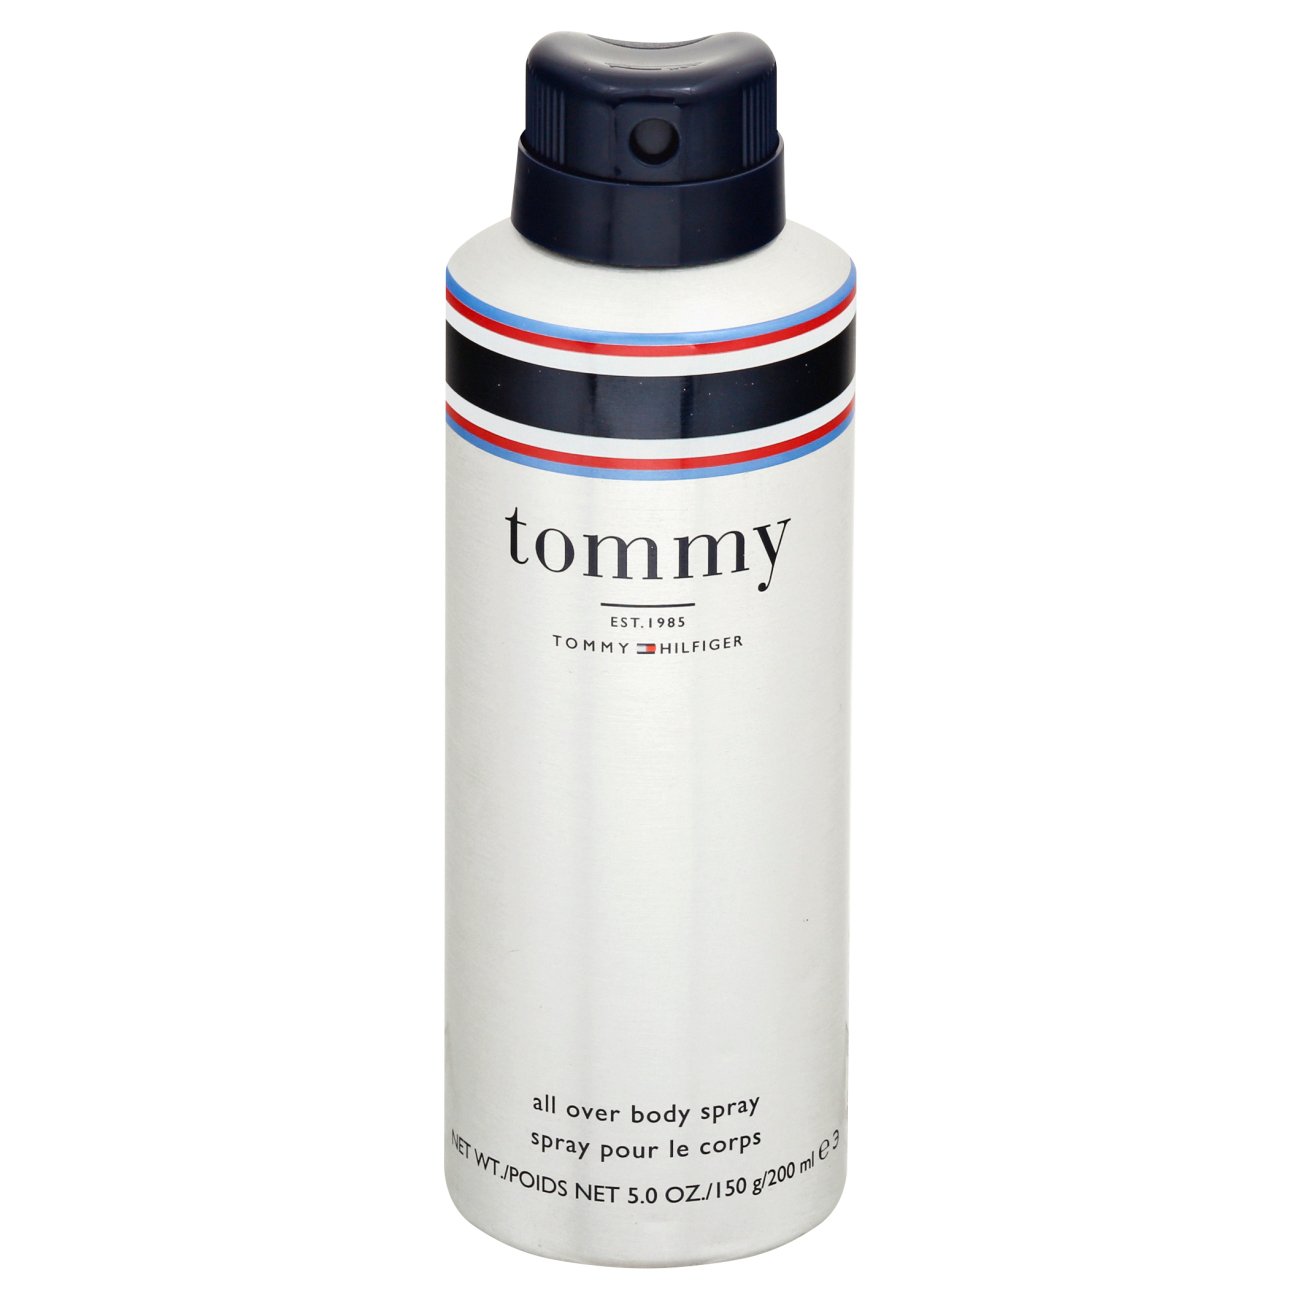 Tommy Hilfiger Tommy All Over Body Shop Fragrance at H-E-B